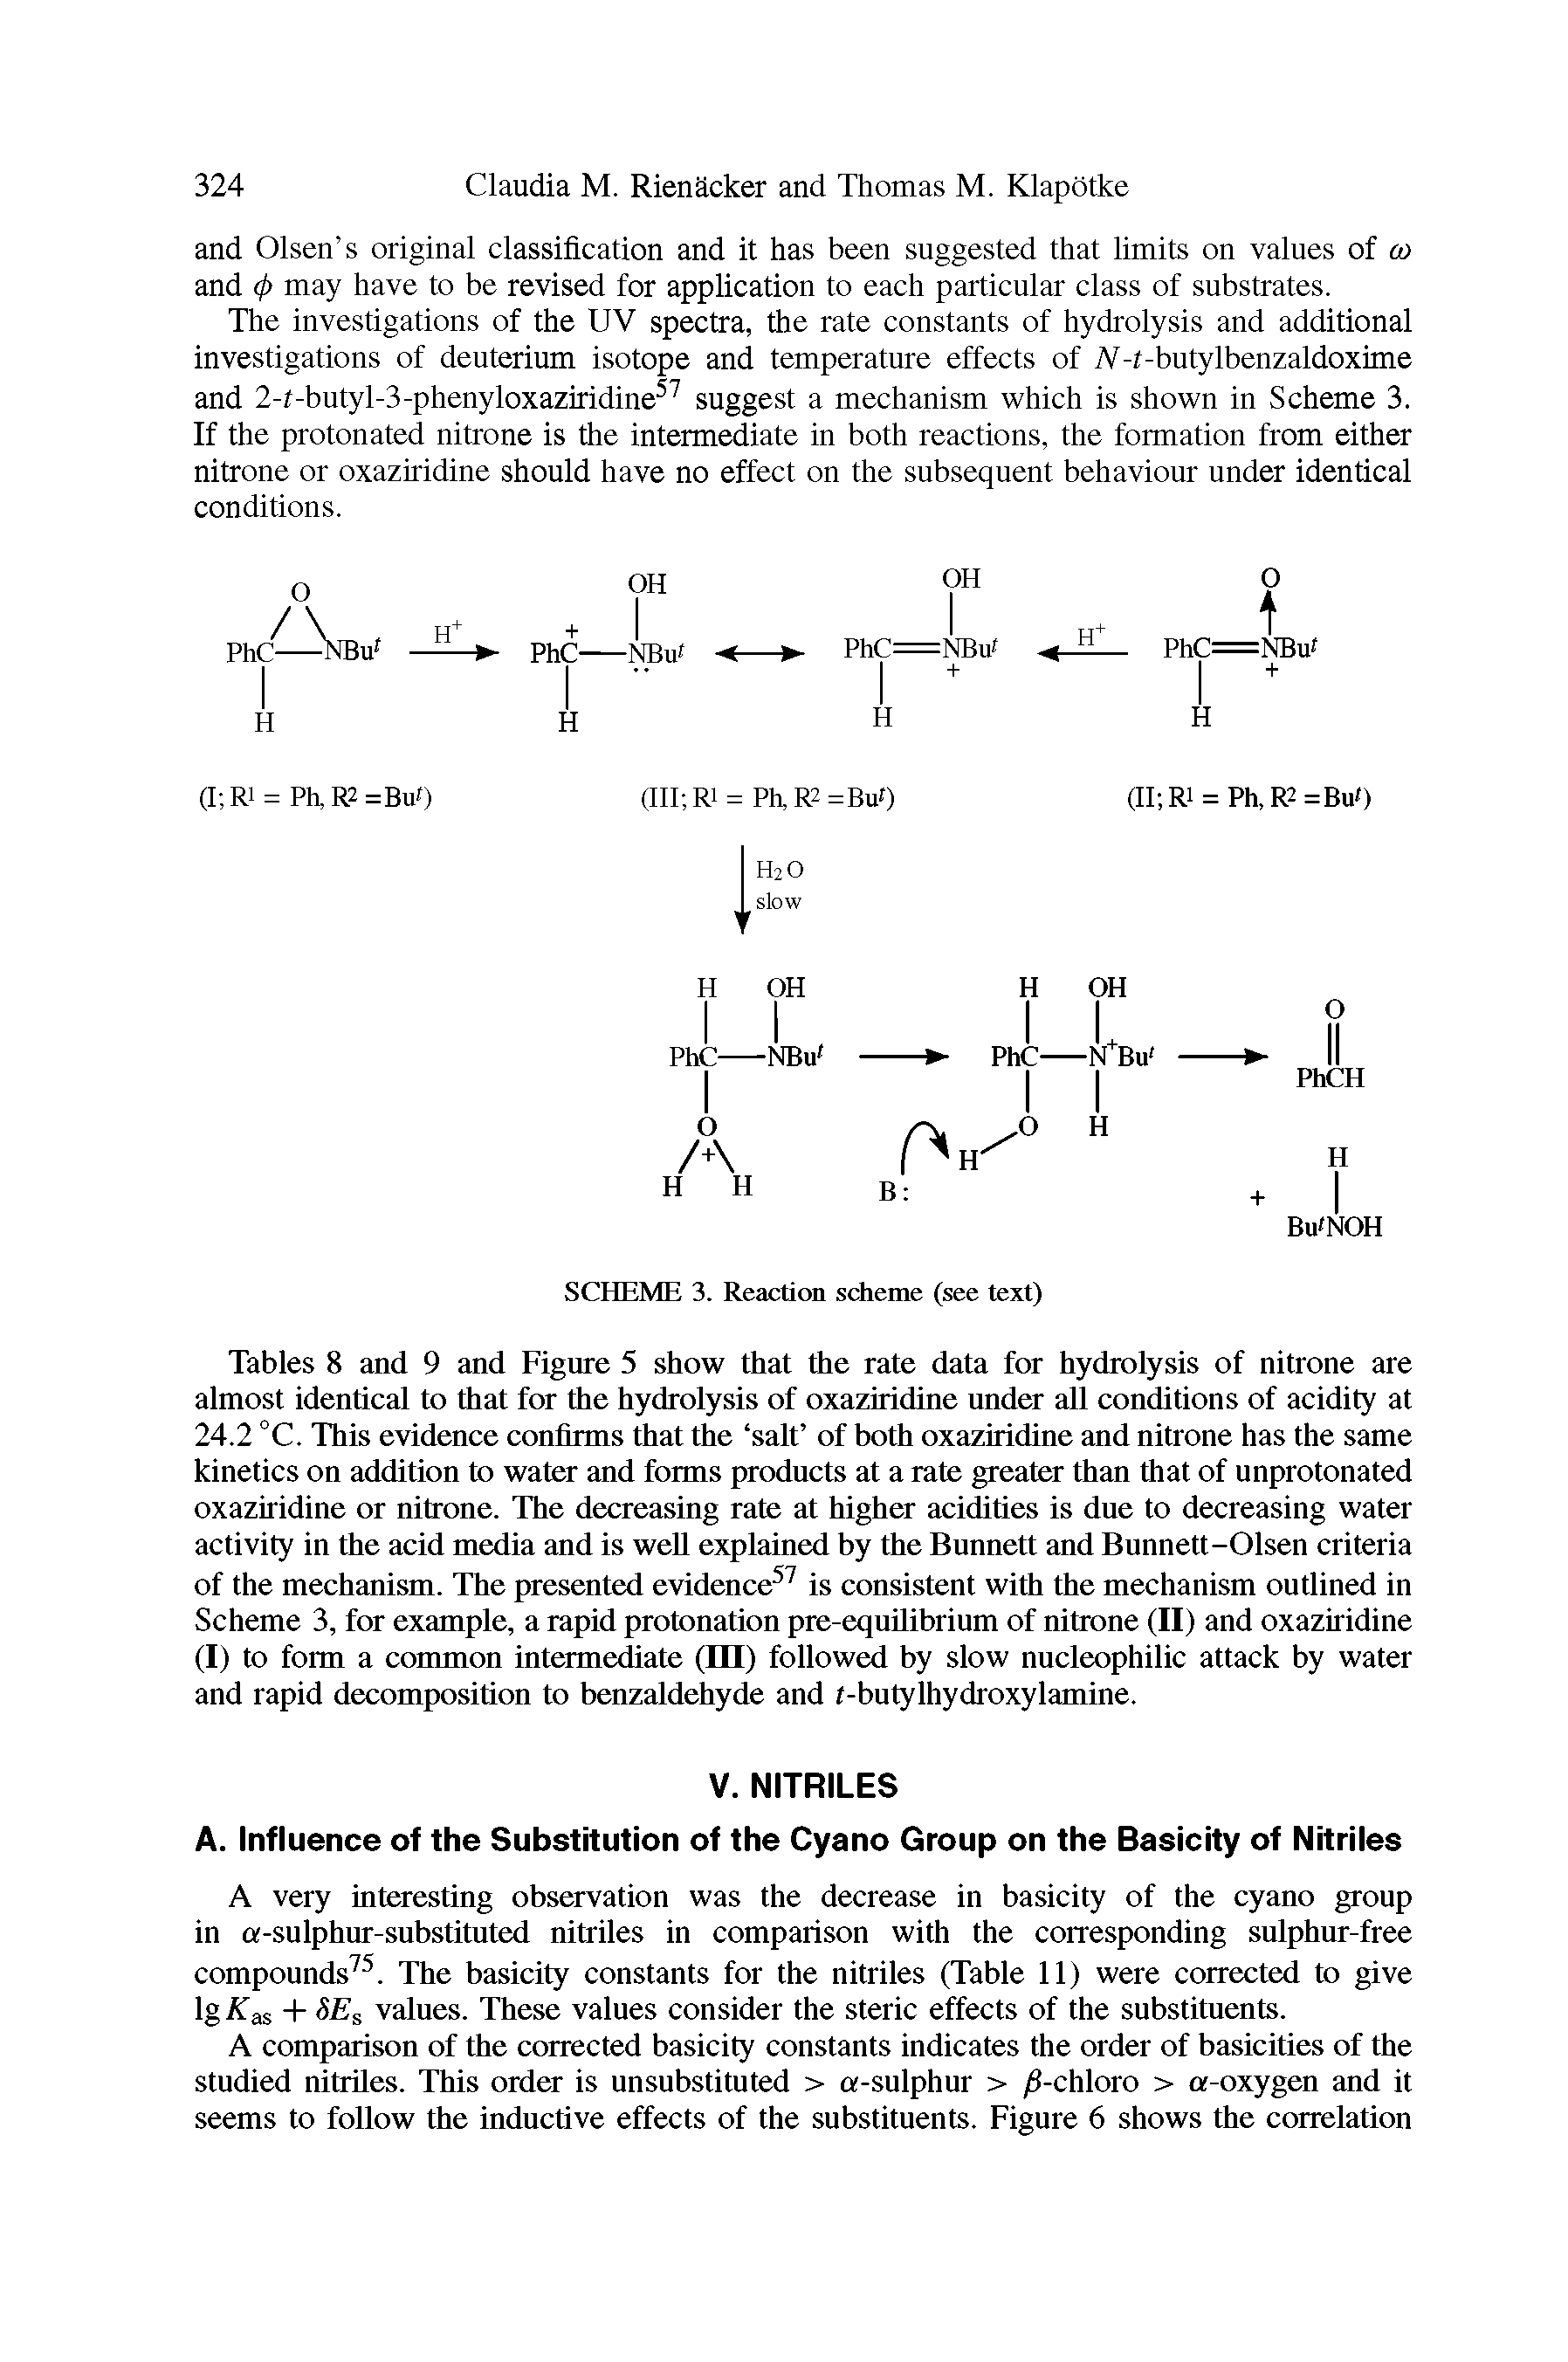 Tables 8 and 9 and Figure 5 show that the rate data for hydrolysis of nitrone are almost identical to that for the hydrolysis of oxaziridine under all conditions of acidity at 24.2 °C. This evidence confirms that the salt of both oxaziridine and nitrone has the same kinetics on addition to water and forms products at a rate greater than that of unprotonated oxaziridine or nitrone. The decreasing rate at higher acidities is due to decreasing water activity in the acid media and is well explained by the Bunnett and Bunnett-Olsen criteria of the mechanism. The presented evidence57 is consistent with the mechanism outlined in Scheme 3, for example, a rapid protonation pre-equilibrium of nitrone (II) and oxaziridine (I) to form a common intermediate (HI) followed by slow nucleophilic attack by water and rapid decomposition to benzaldehyde and t-butylhydroxylamine.